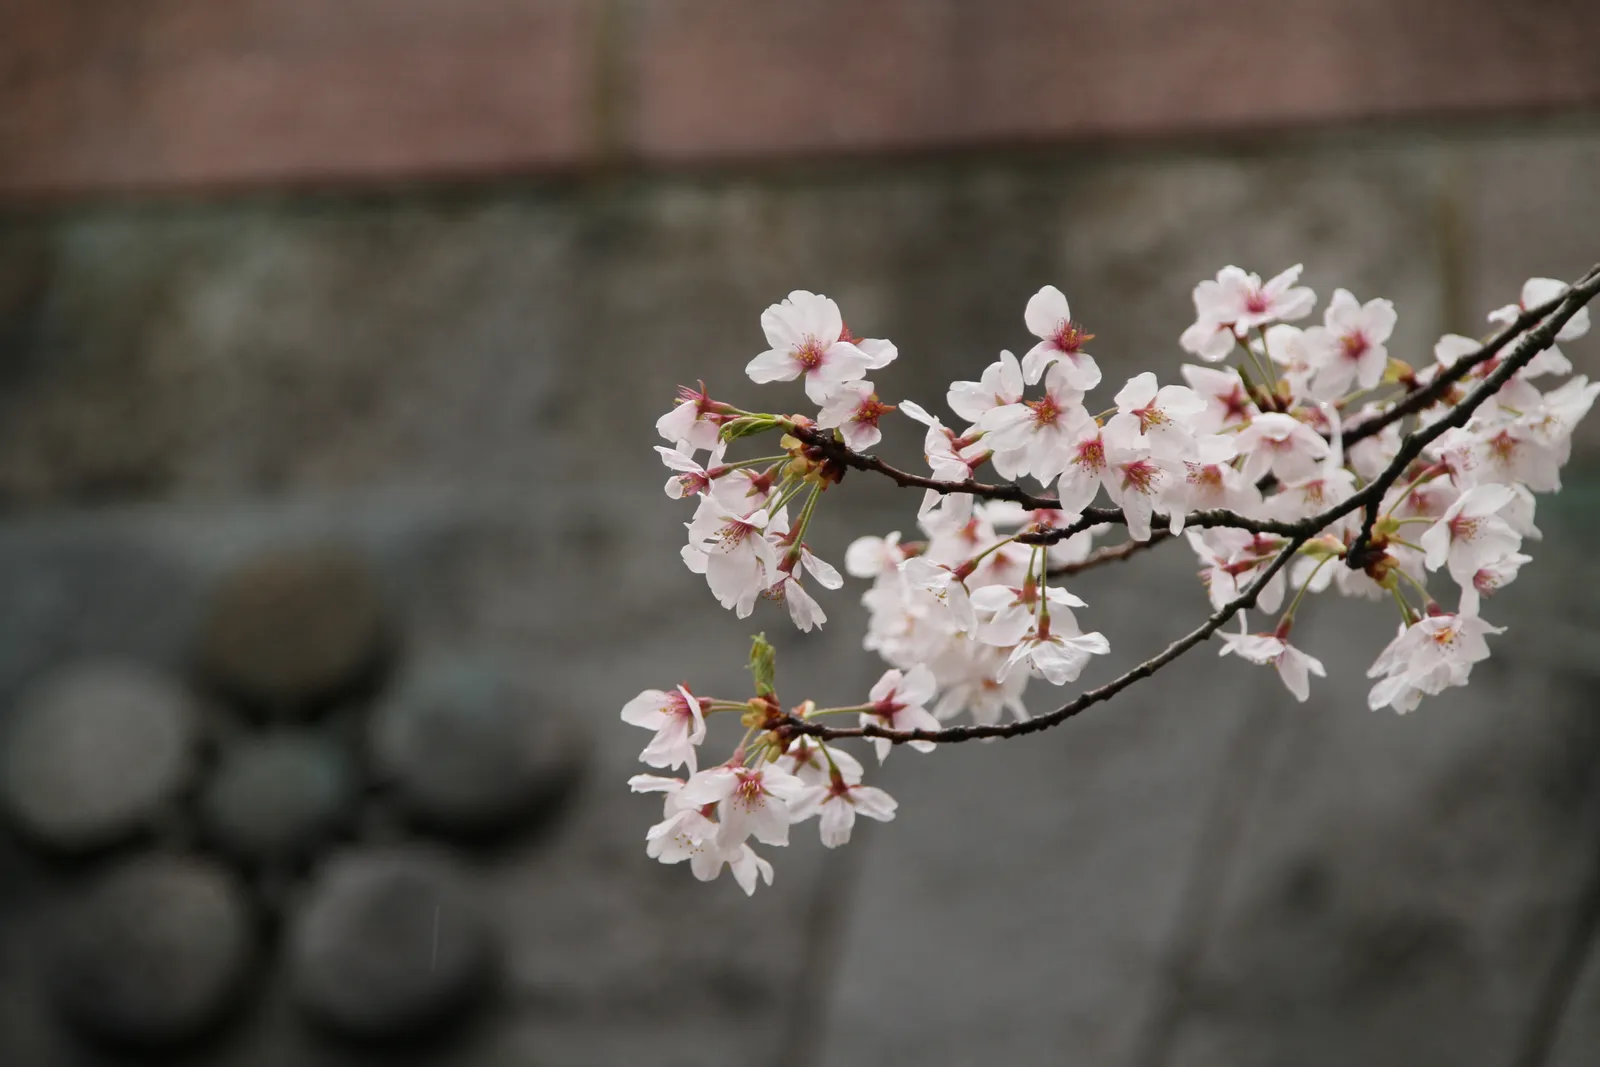 Why Are Japan's Cherry Blossom Trees Blooming in Fall?